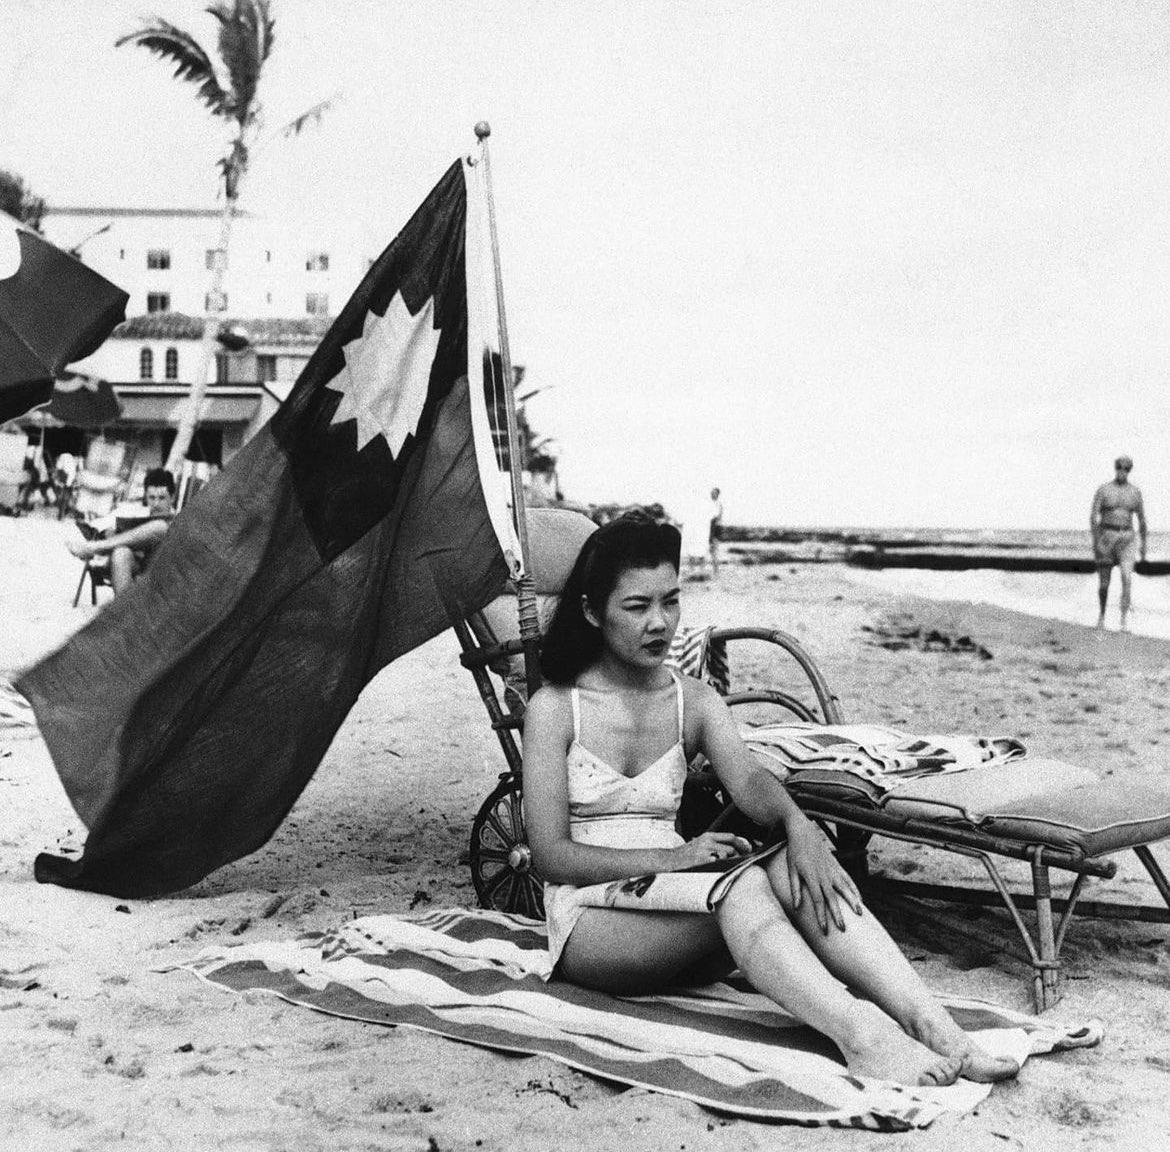 Ruth Lee, a hostess at a Chinese restaurant, chose to spend her day off on December 15th, 1941, sunbathing on a Miami beach, as was her custom. In a significant departure from her usual routine, she took a Chinese flag with her to ensure that onlookers would not mistake her for